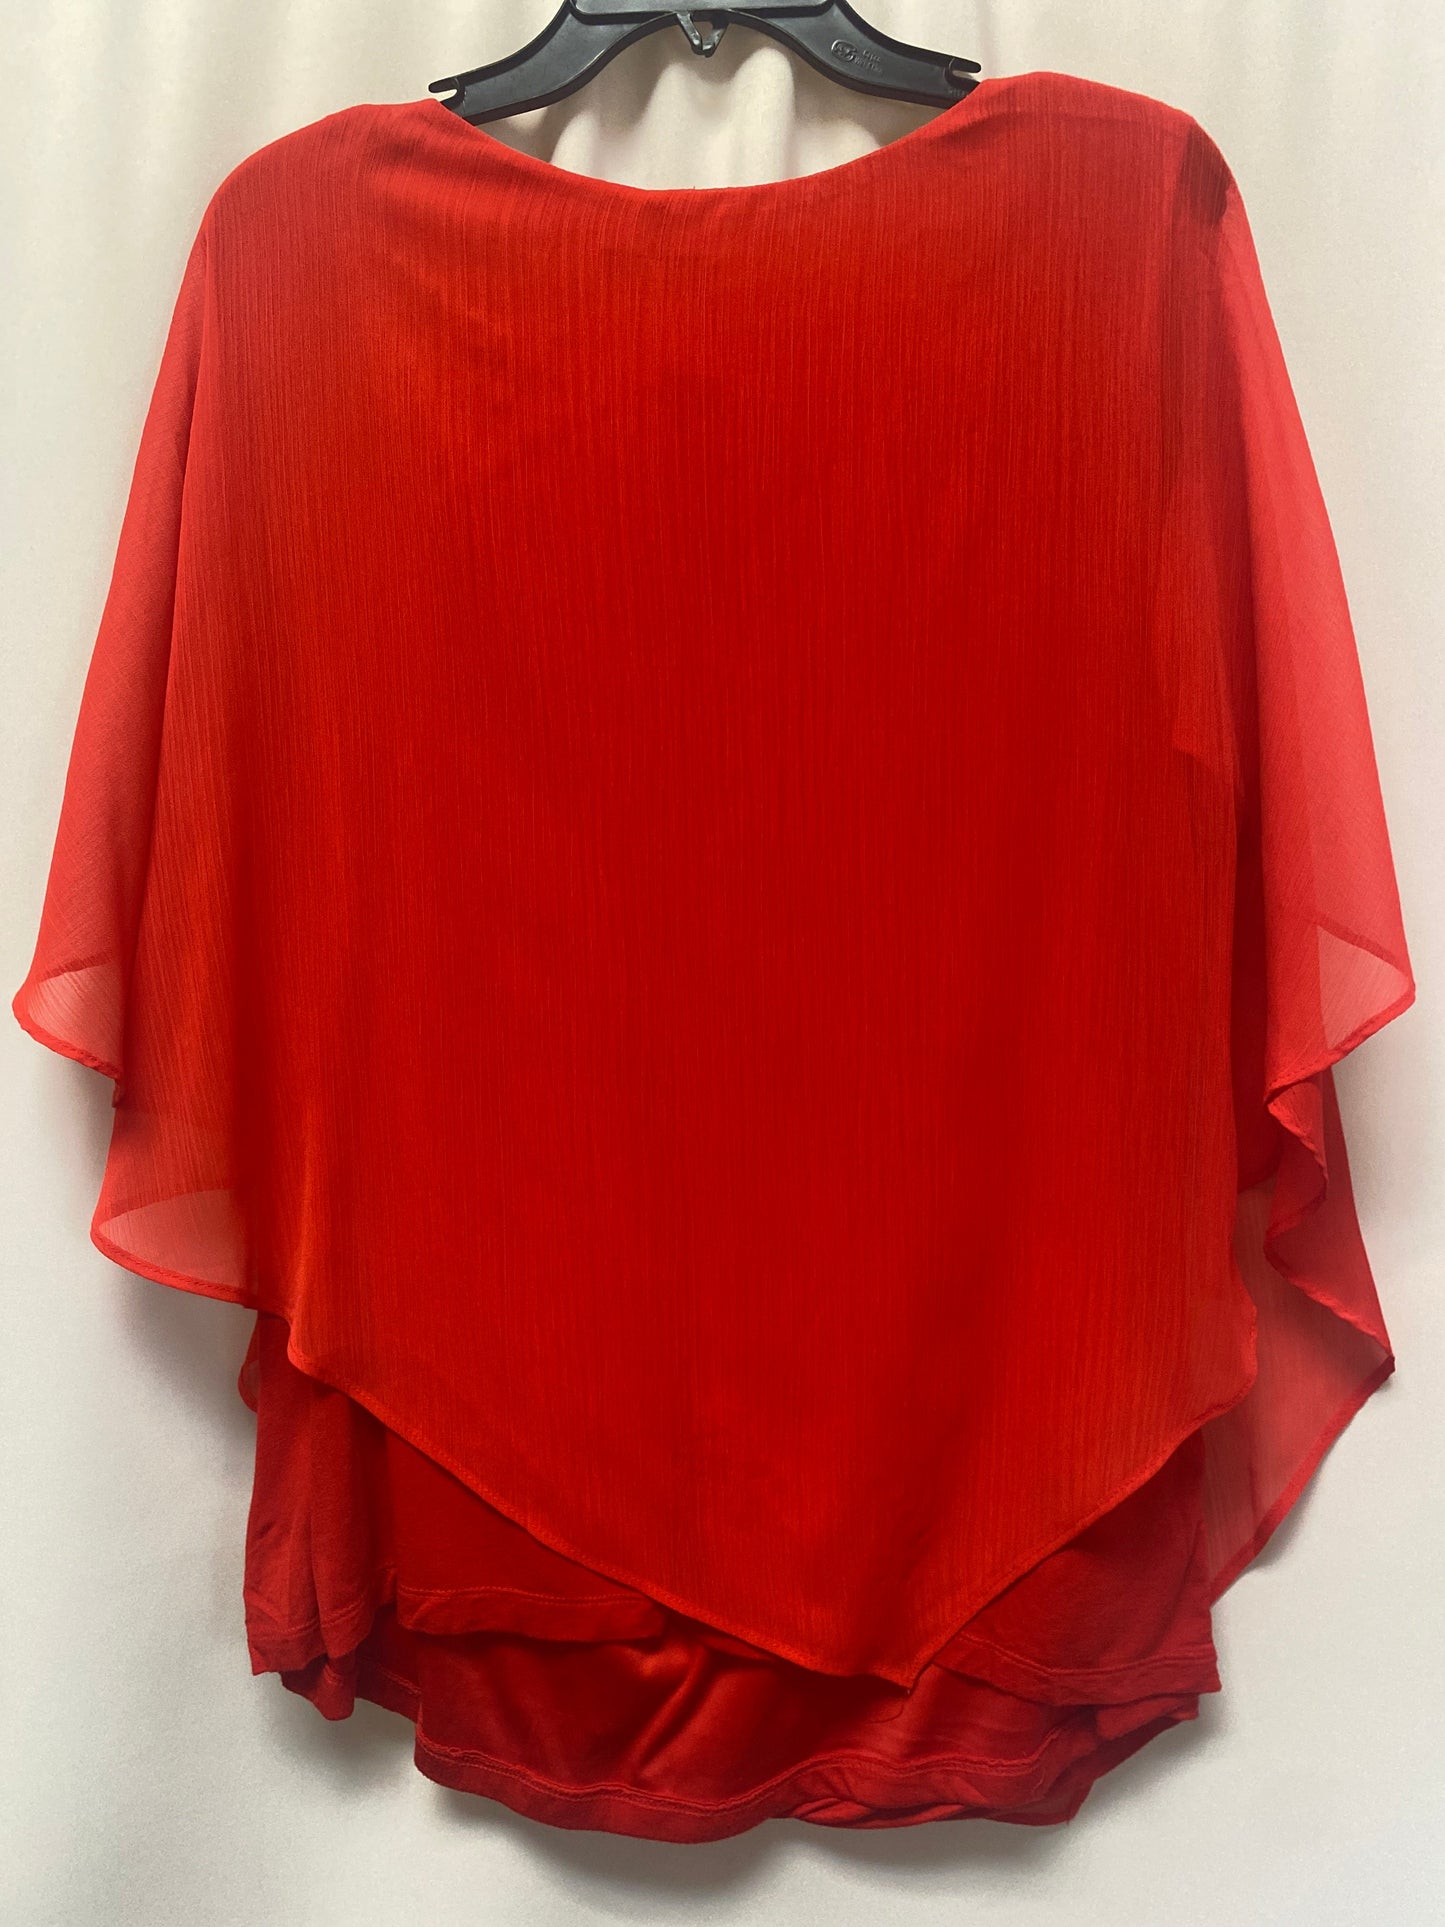 Red Top Long Sleeve Alyx, Size 3x